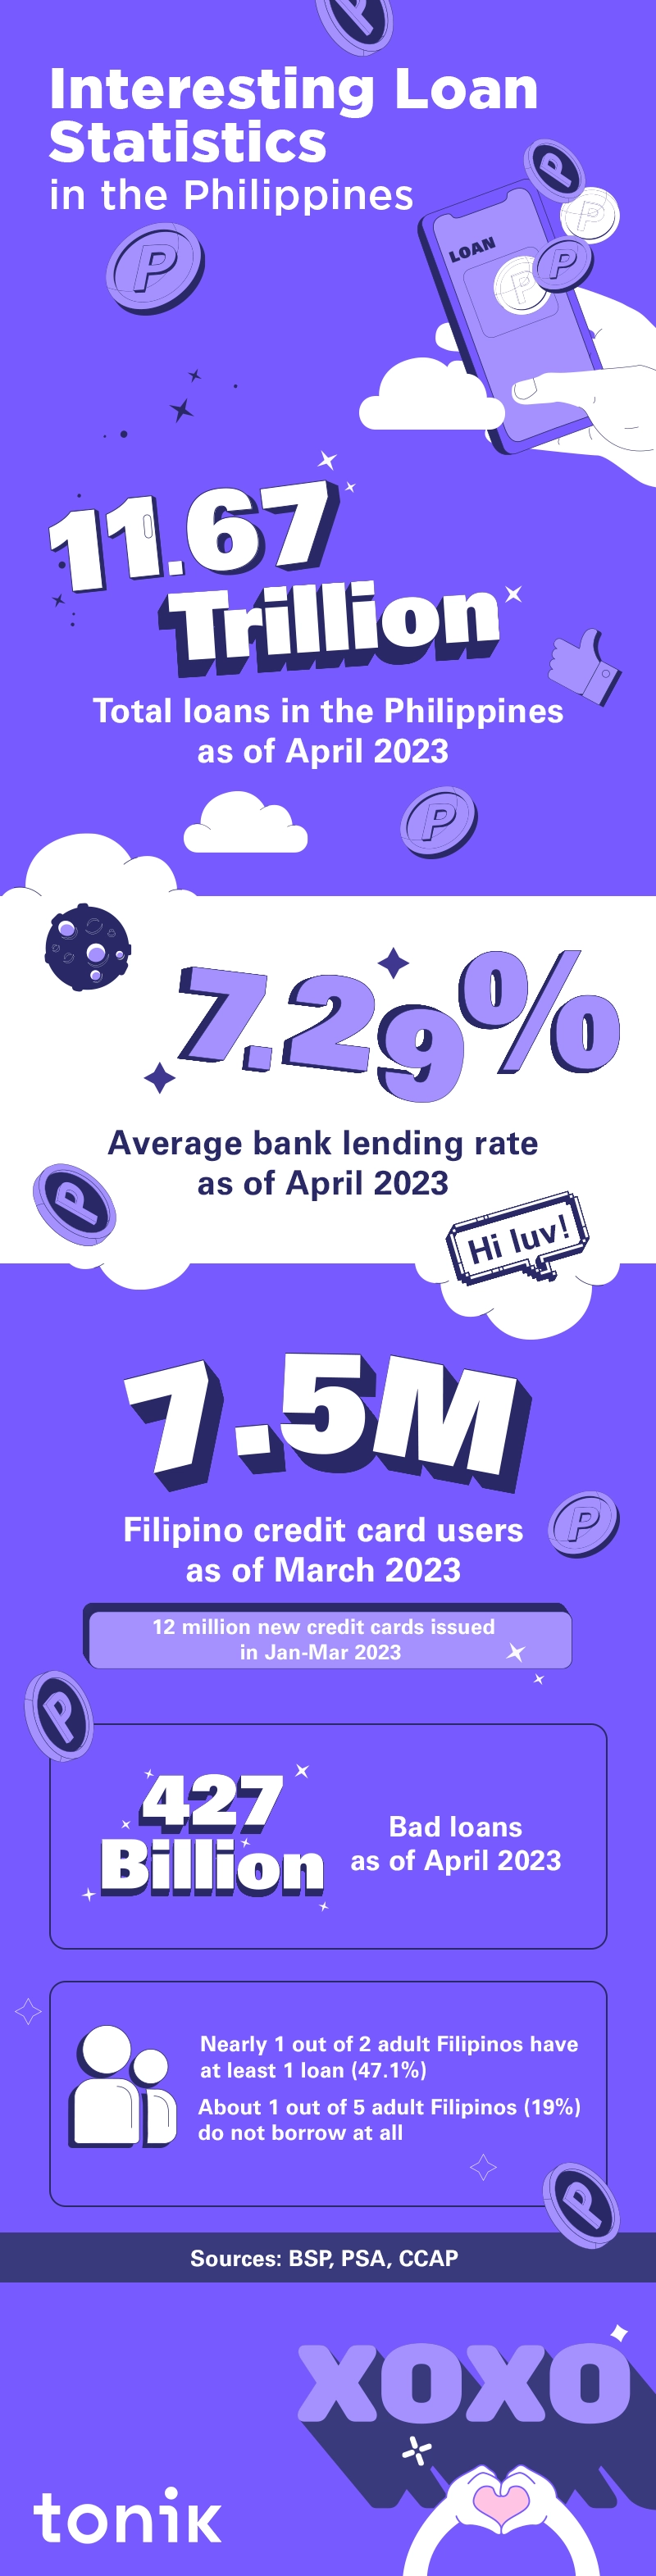 infographic about interesting loan statistics in the Philippines